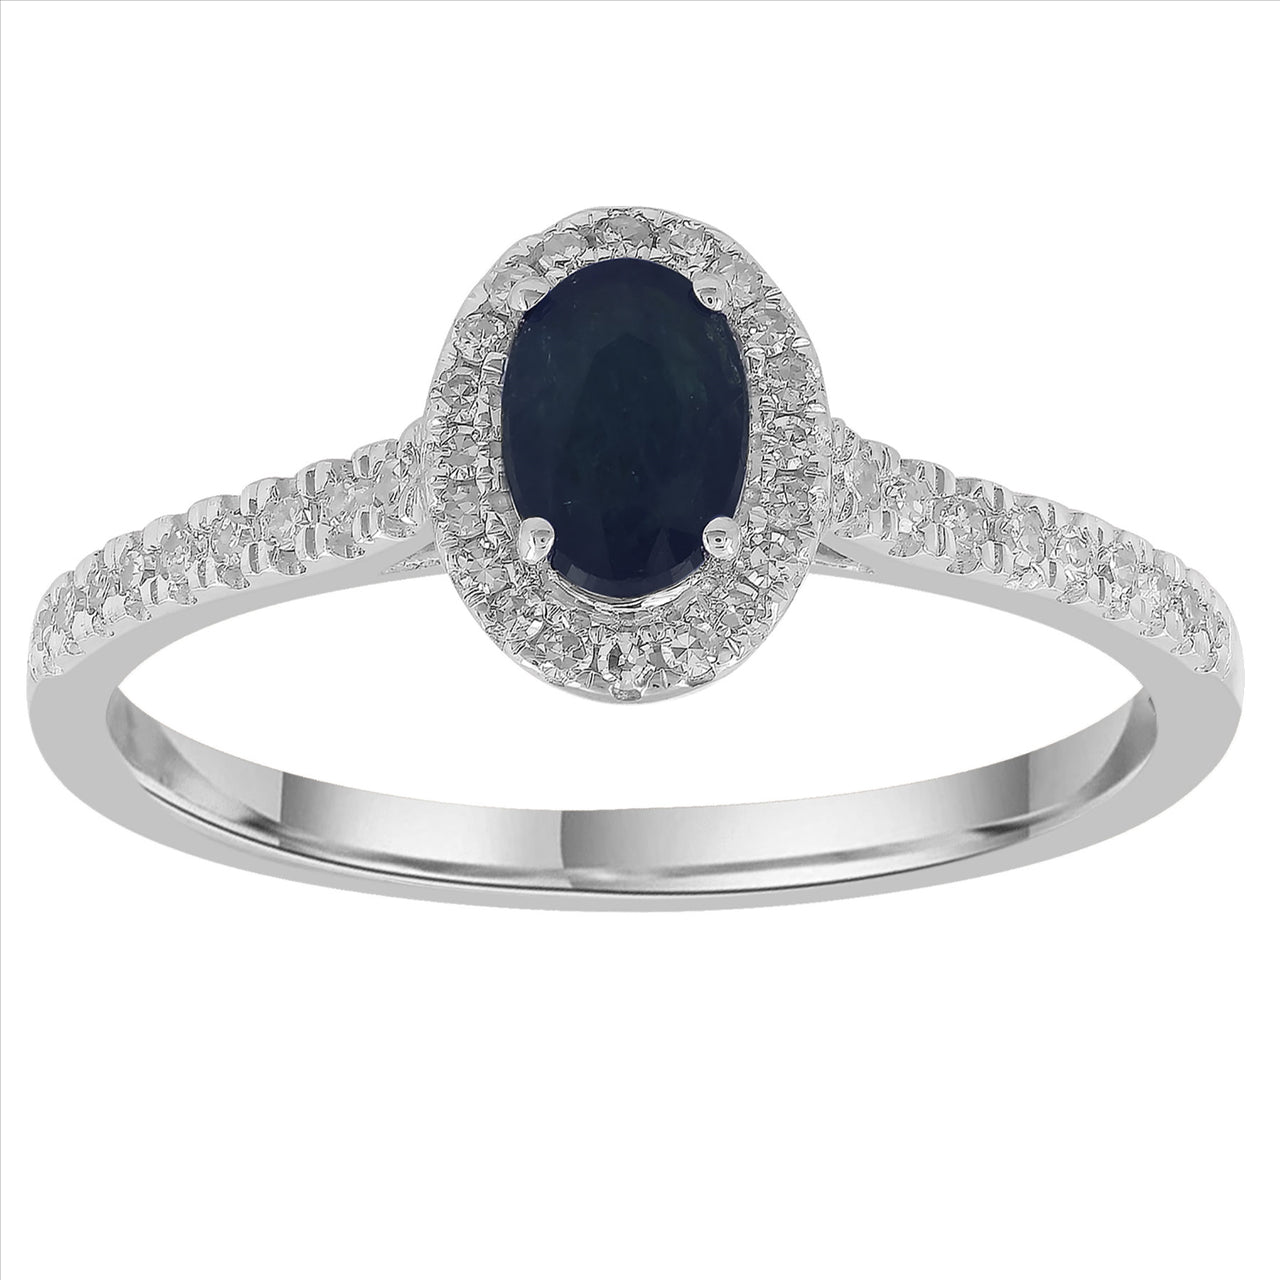 Oval Sapphire and Diamond Ring in 9 Carat White Gold.